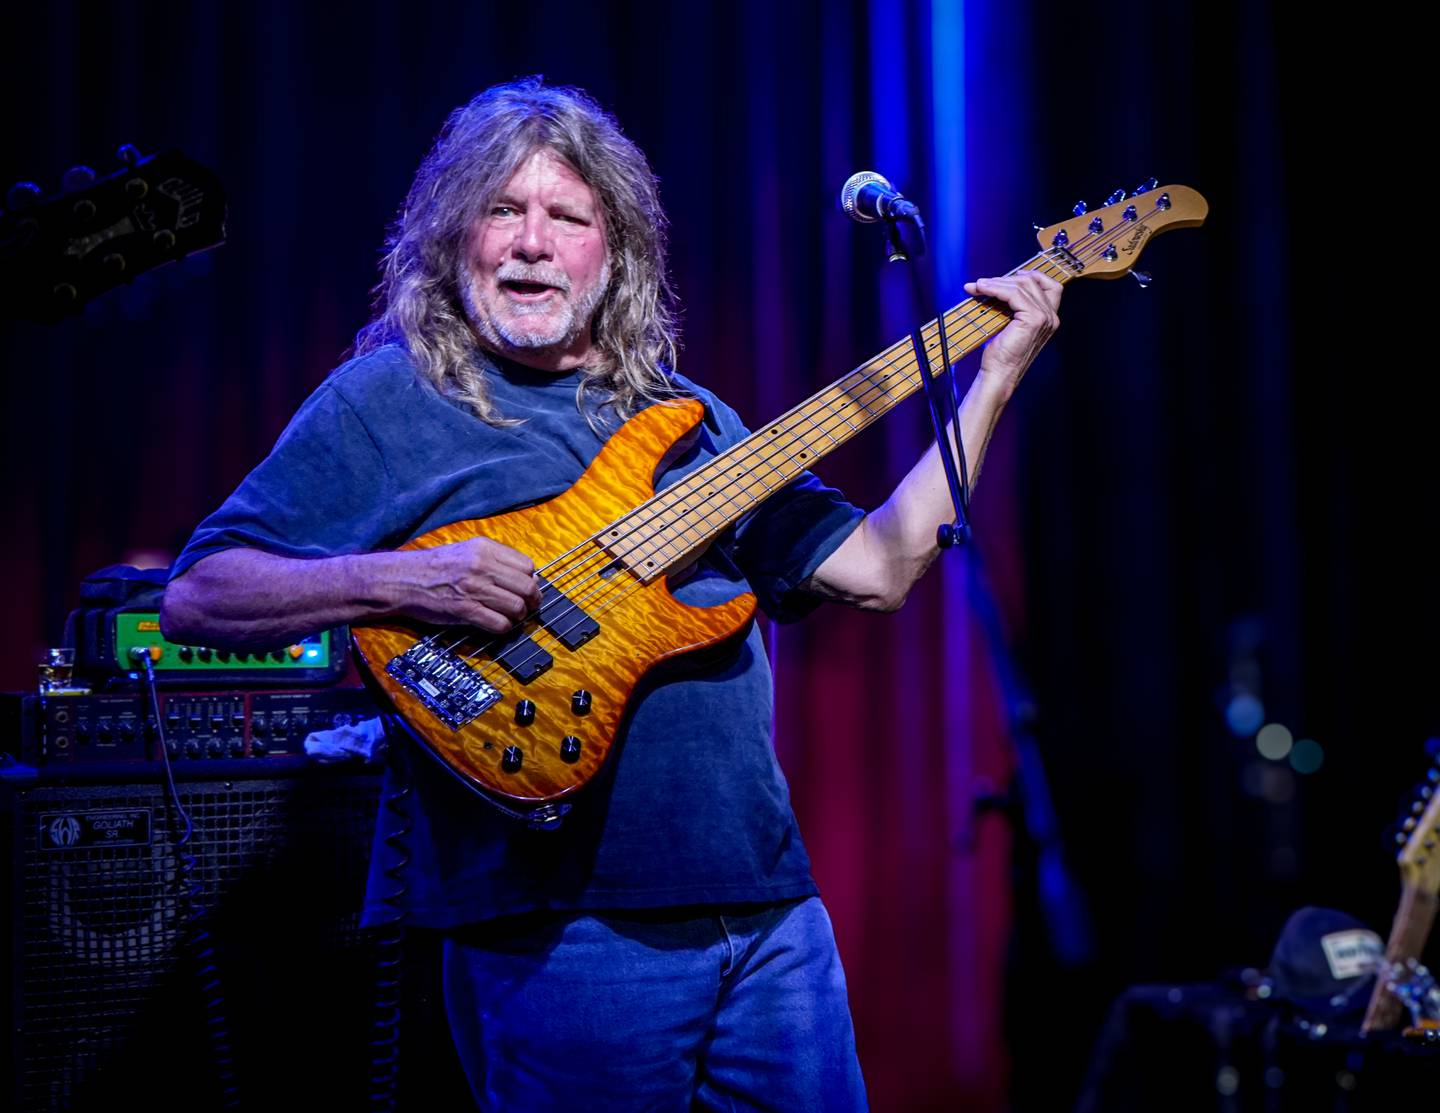 Bassist John June performs with Drew Cooper at Yorkville's Summer Solstice Indie Music Festival's after-show at the Law Office Pub and Music Hall